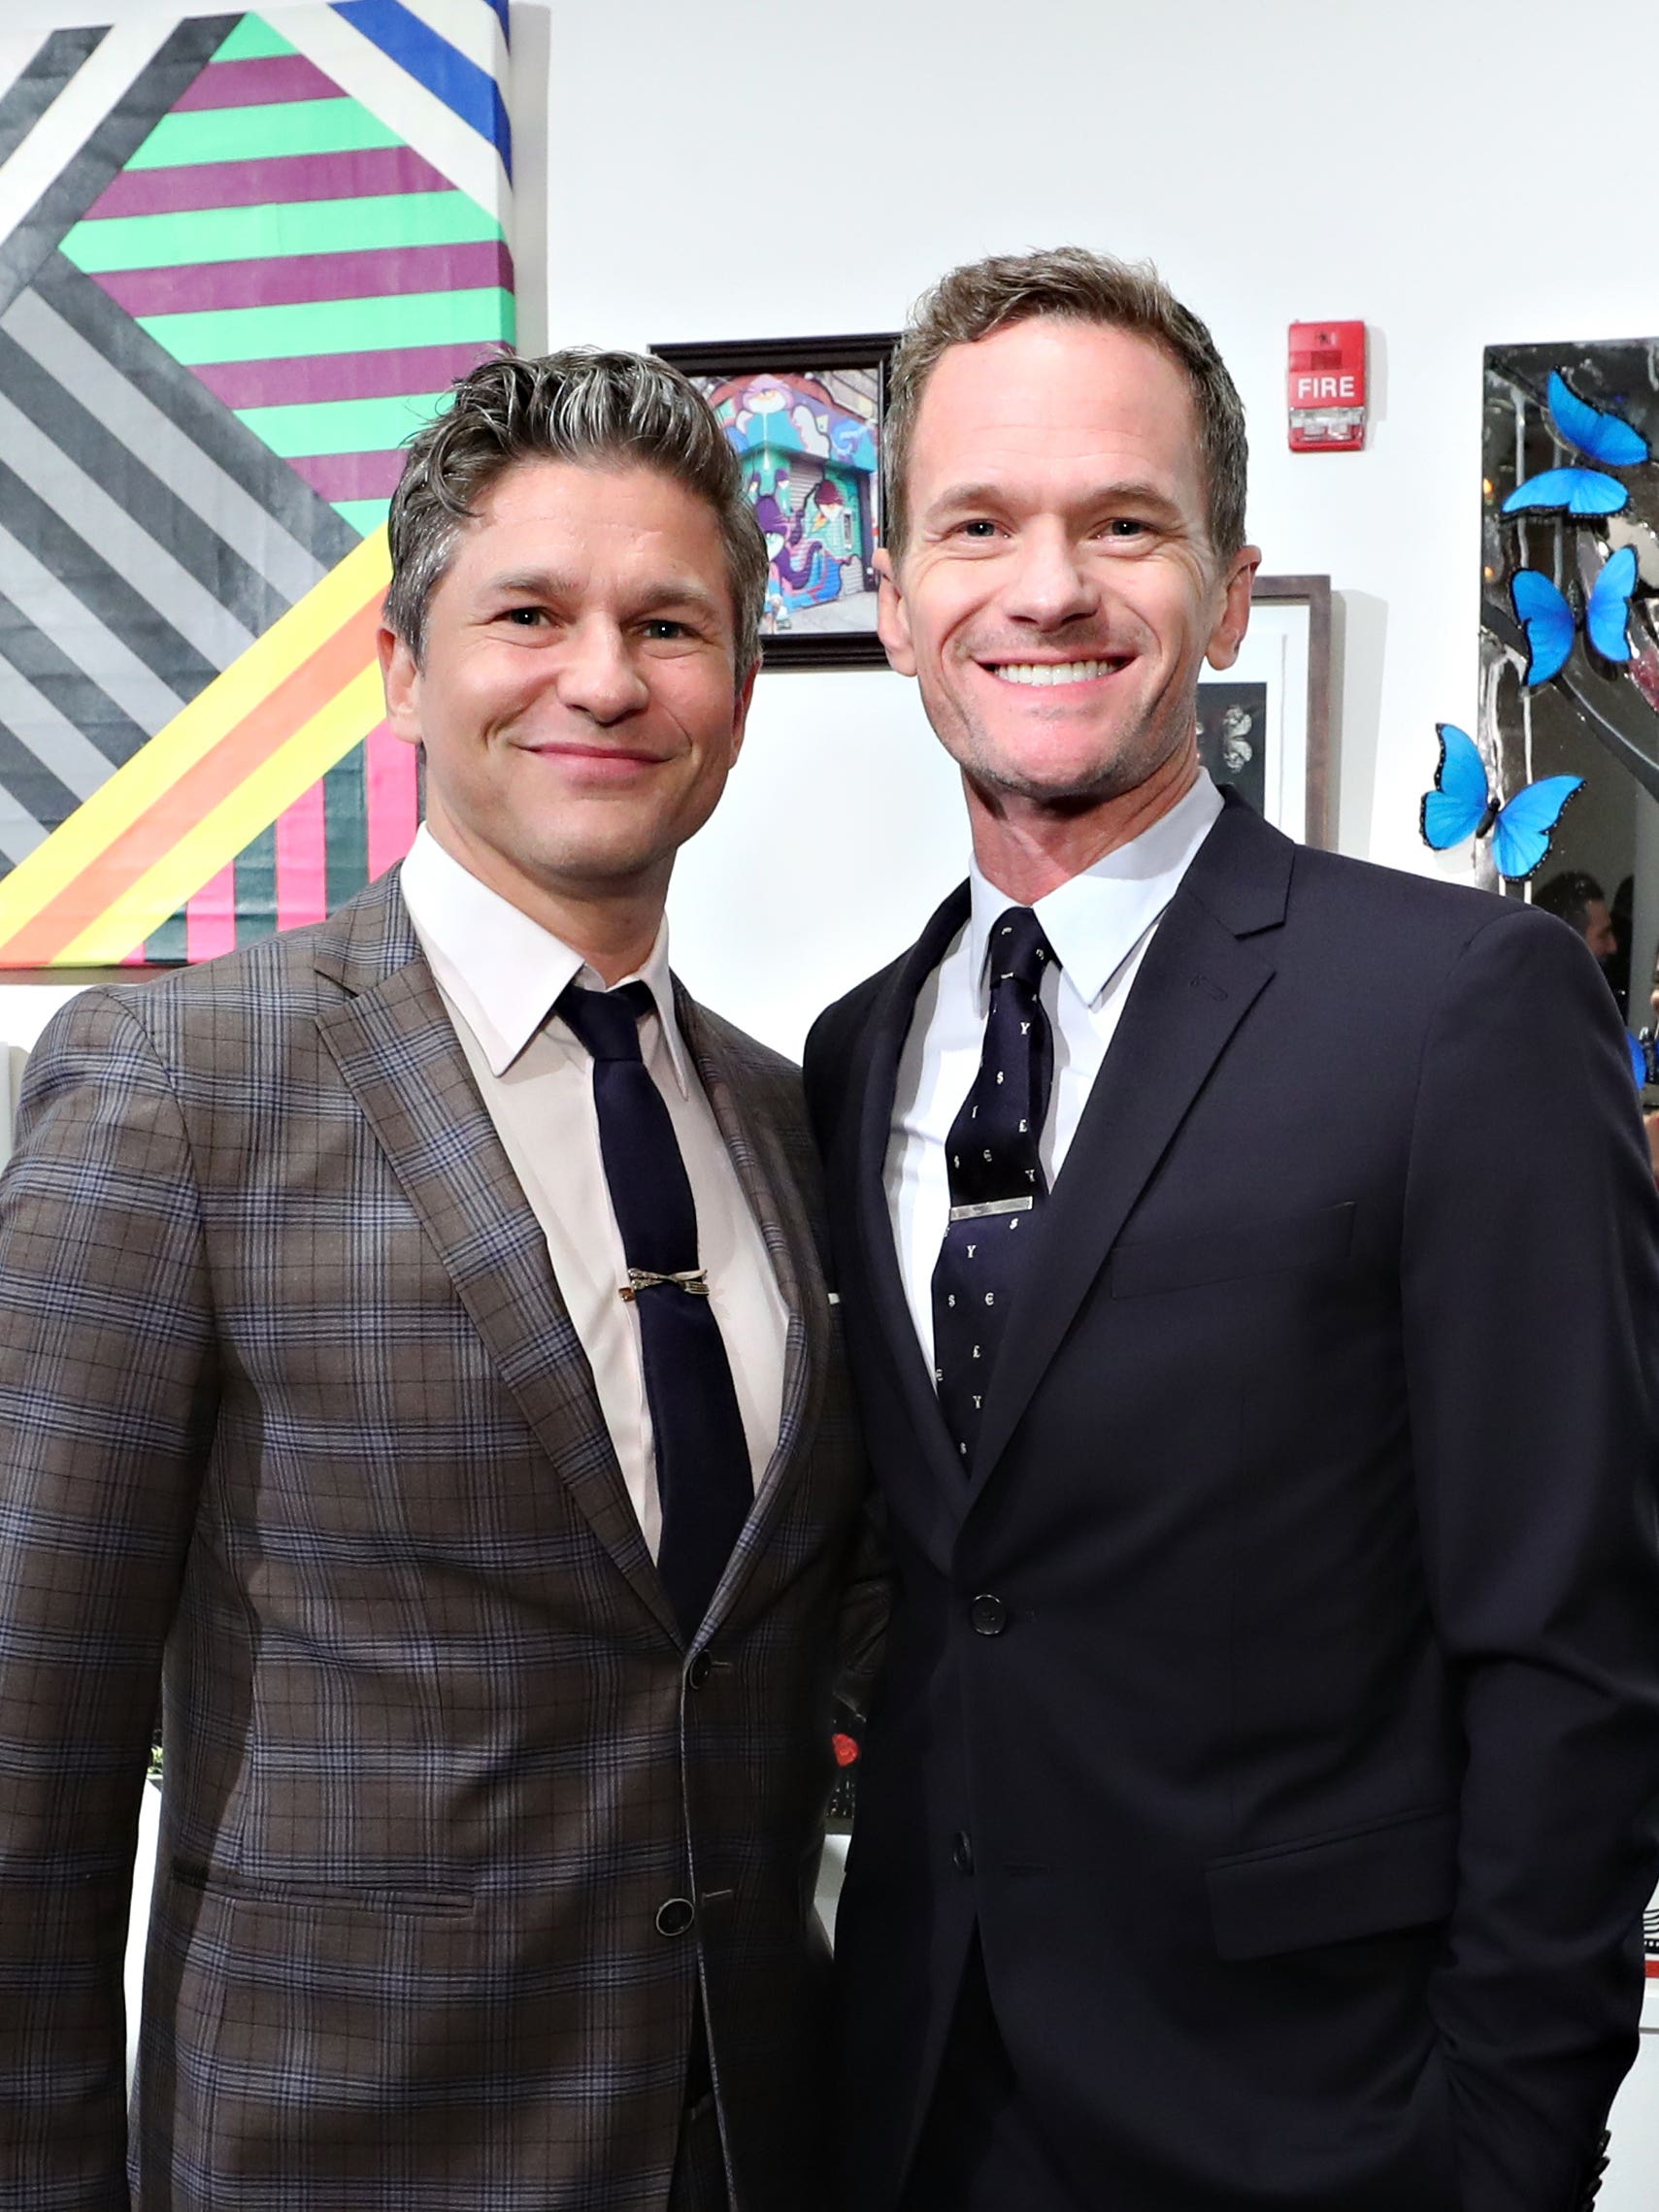 Neil Patrick Harris and David Burtka Know the Best Party Games